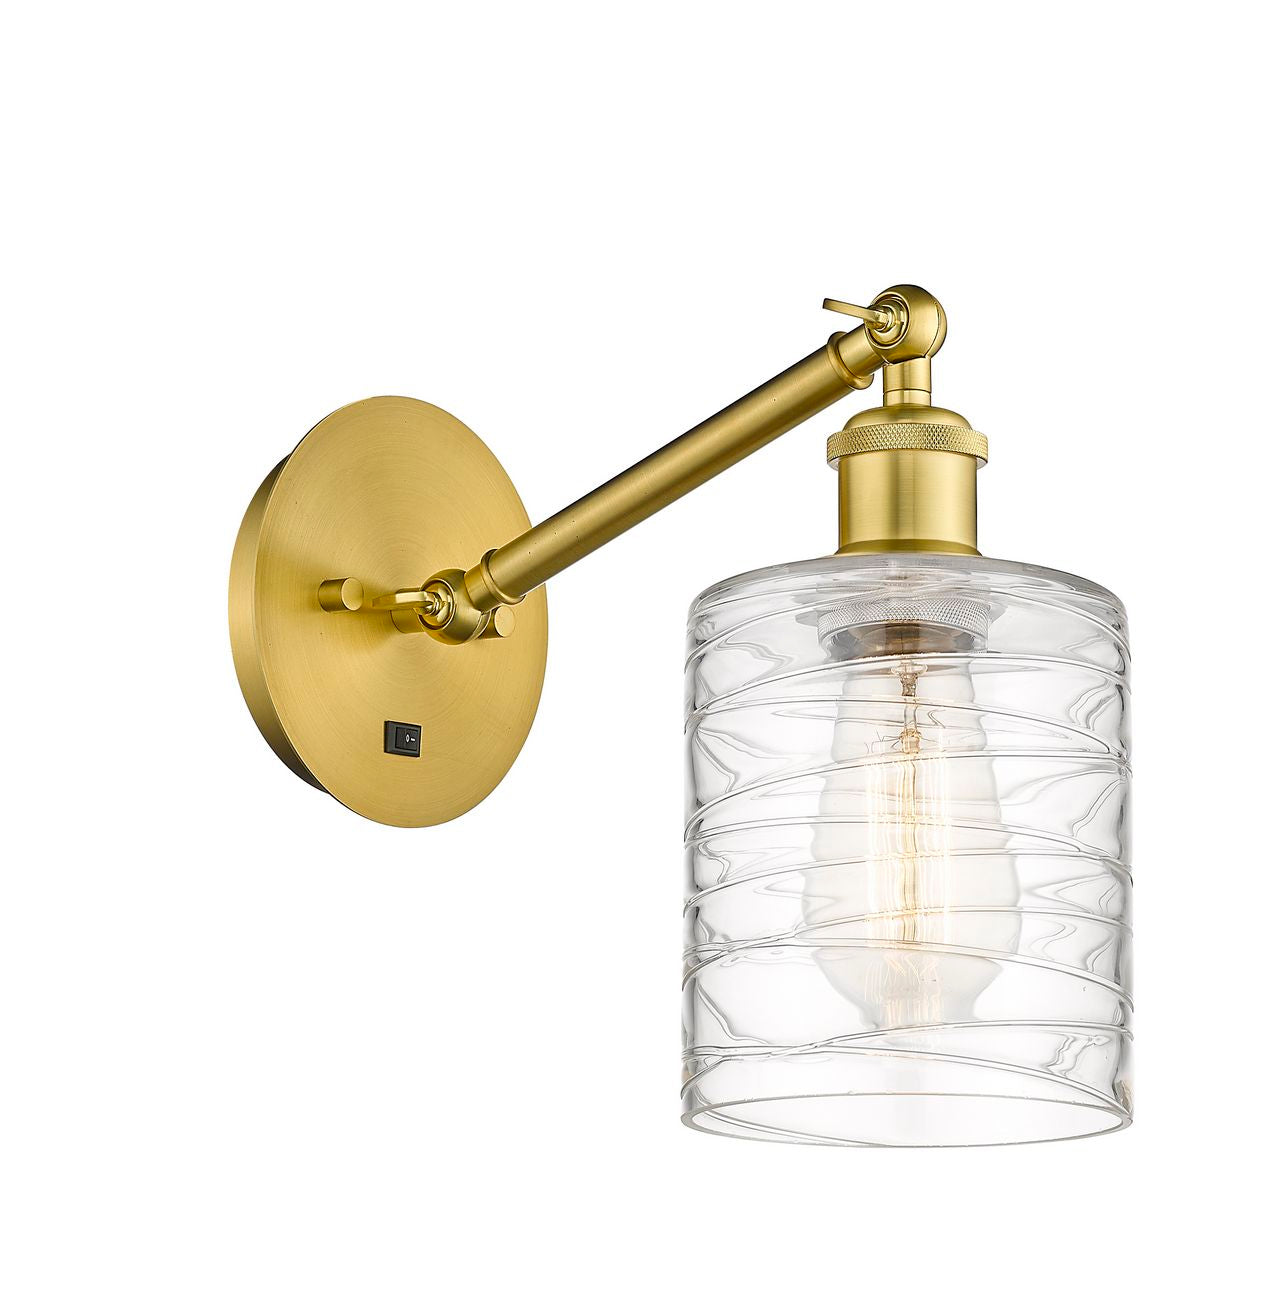 317-1W-SG-G1113 1-Light 5.3" Satin Gold Sconce - Deco Swirl Cobbleskill Glass - LED Bulb - Dimmensions: 5.3 x 12.5 x 12.75 - Glass Up or Down: Yes